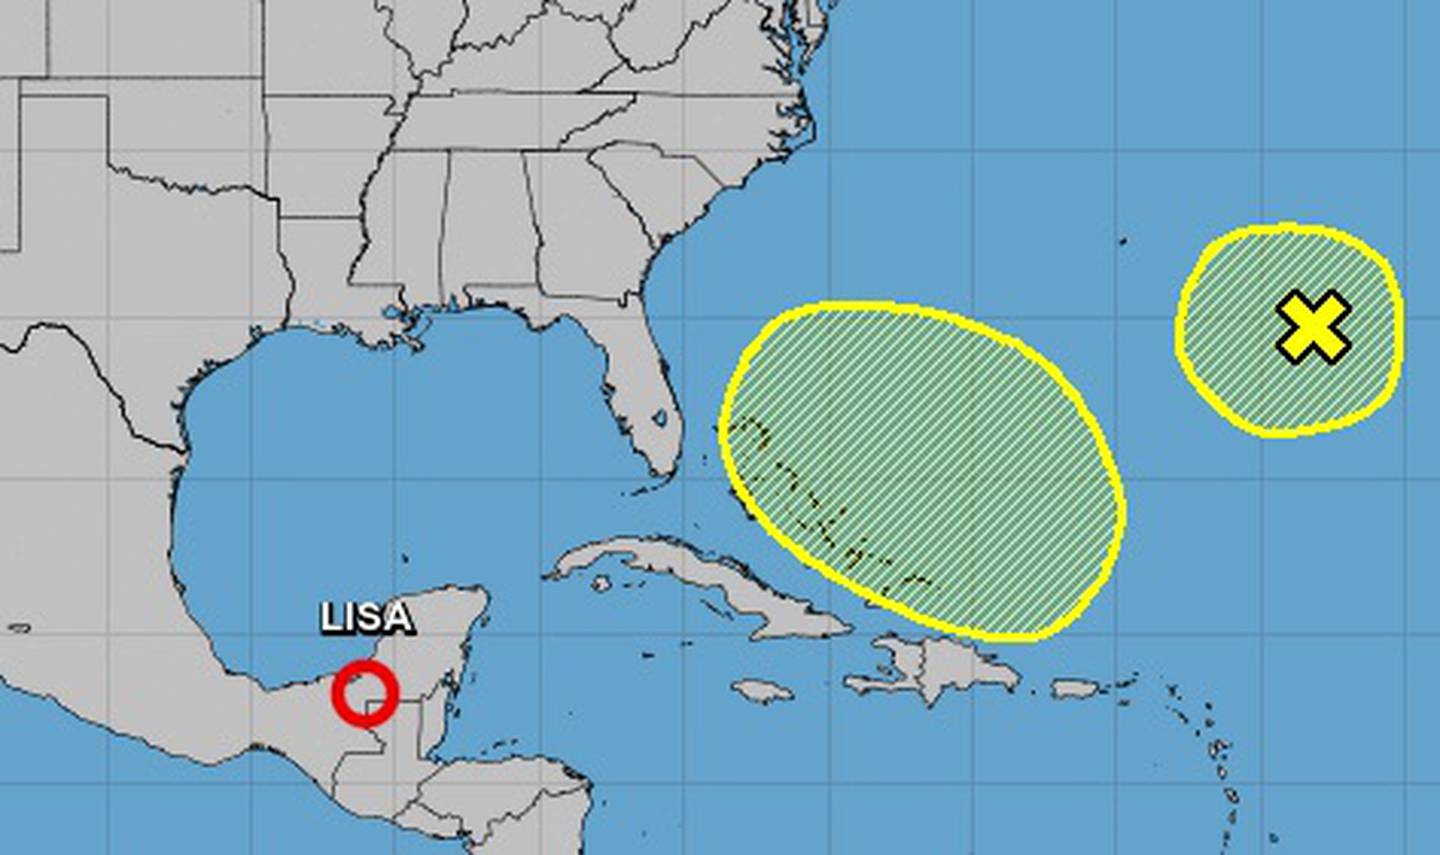 In addition to Lisa and Martin, the National Hurricane Center is monitoring two areas in the Atlantic Ocean for potential storms.